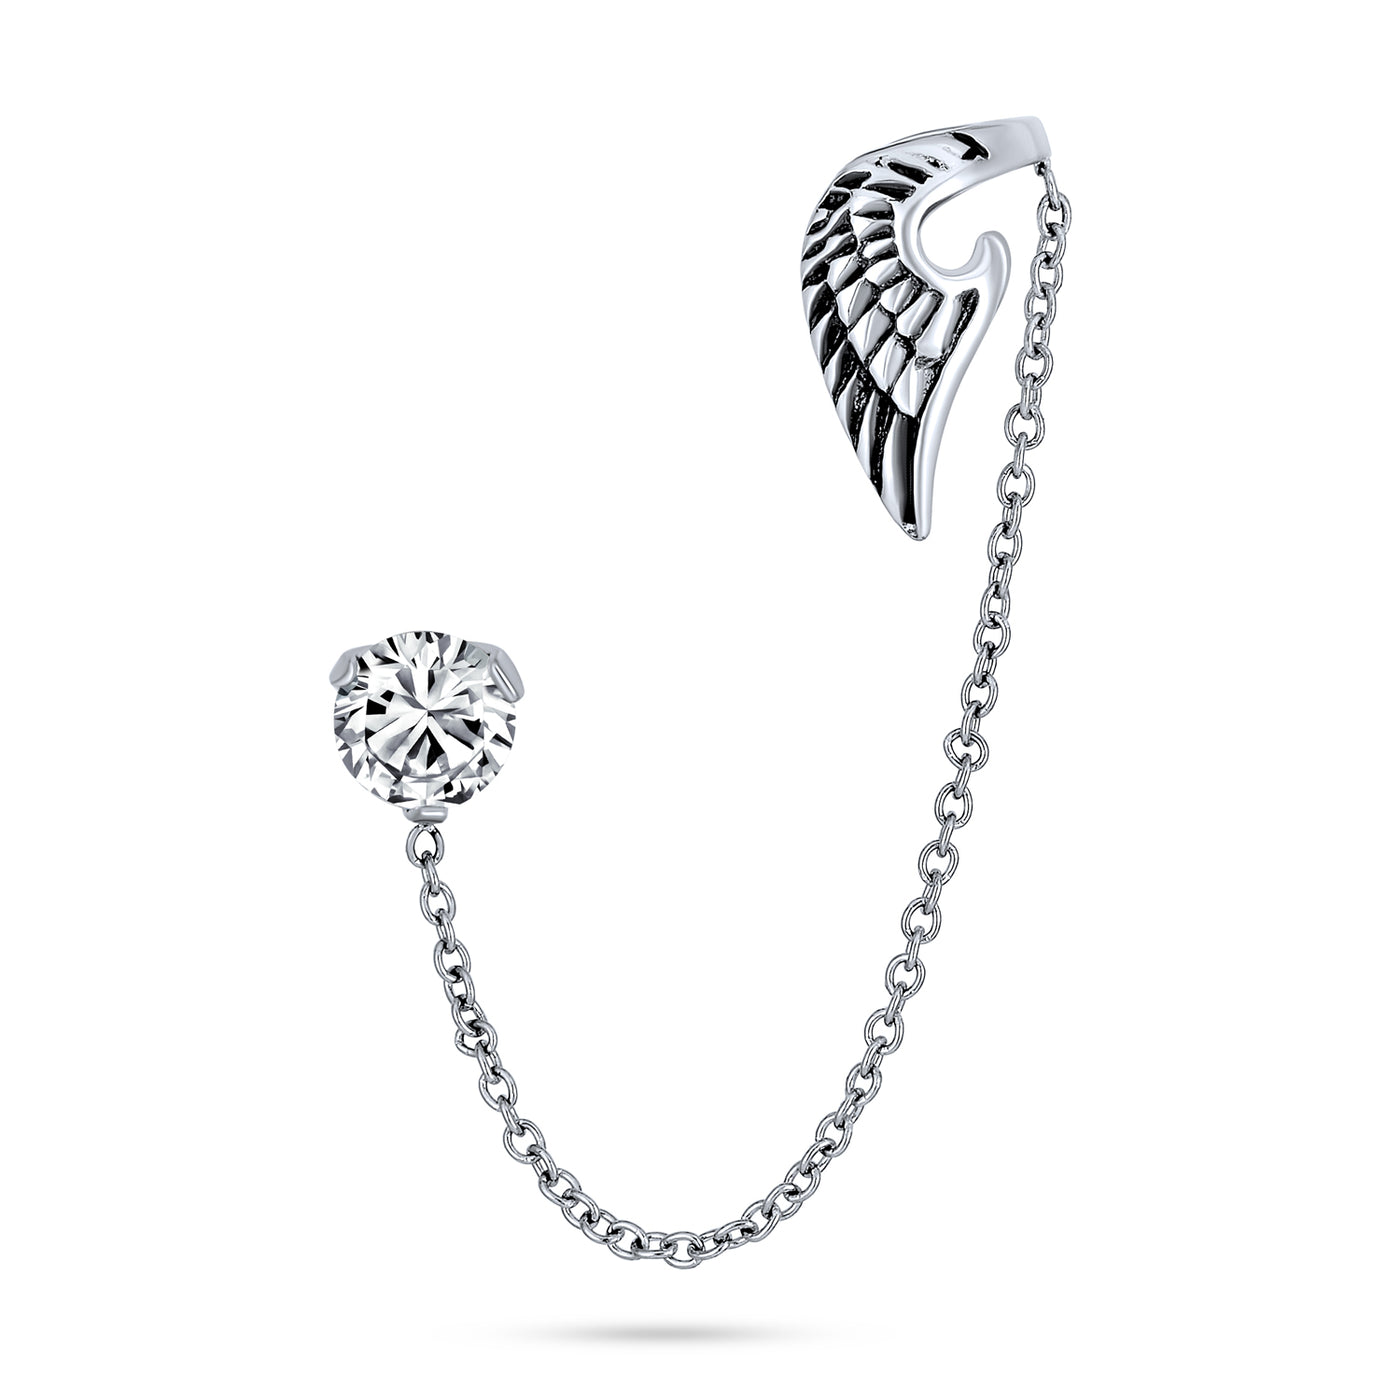 Angel Wing Feather Cartilage Earring Ear Cuff CZ Stud Stainless Steel